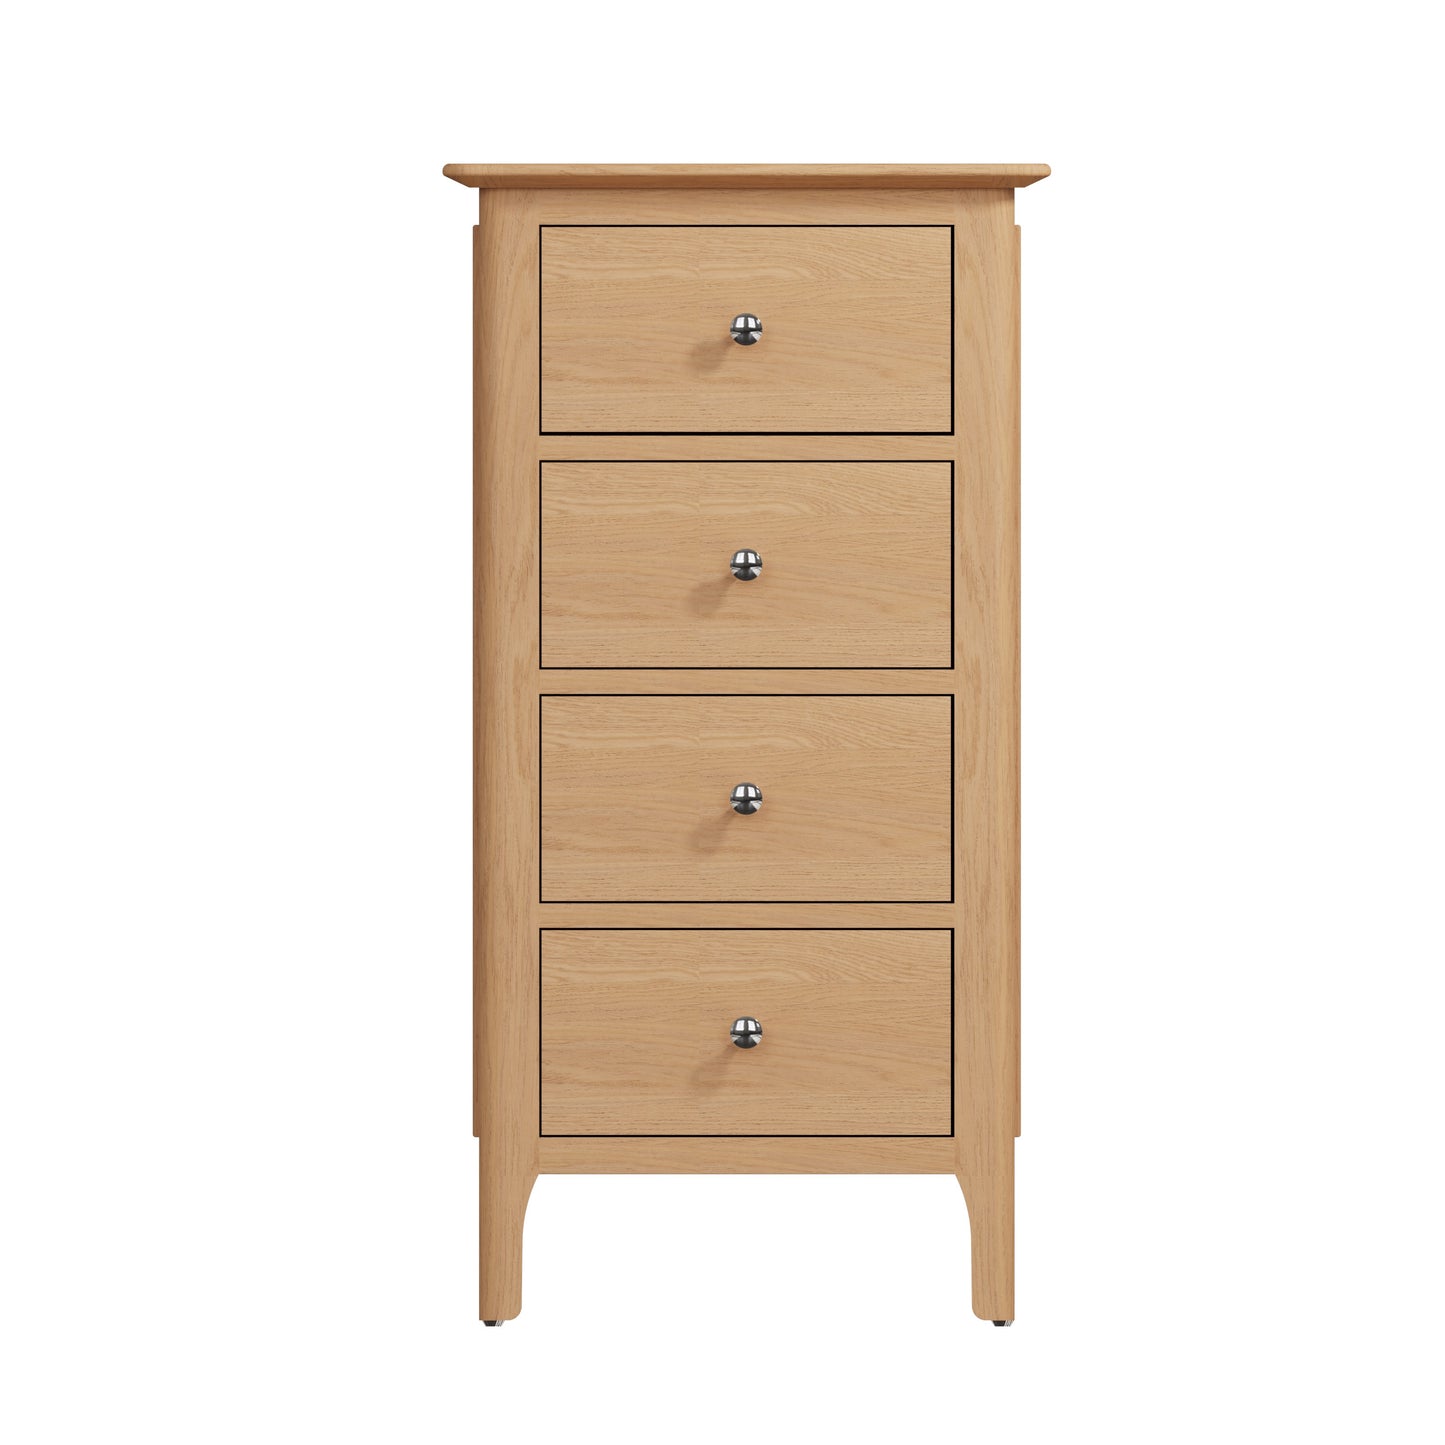 4 Drawer Narrow Chest of Drawers